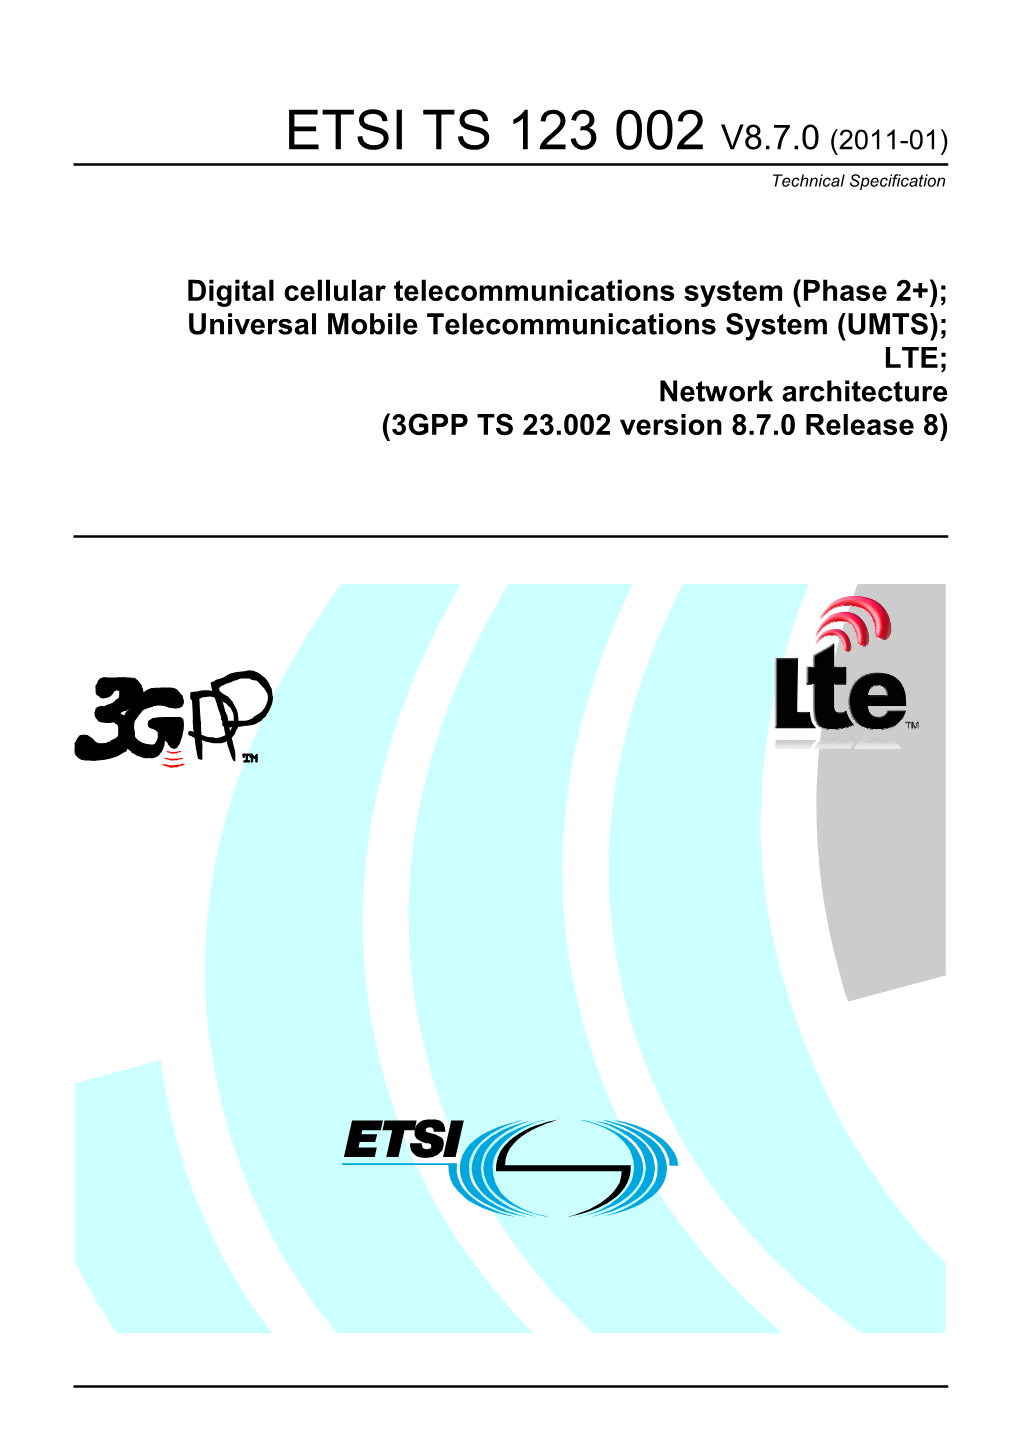 UMTS); LTE; Network Architecture (3GPP TS 23.002 Version 8.7.0 Release 8)